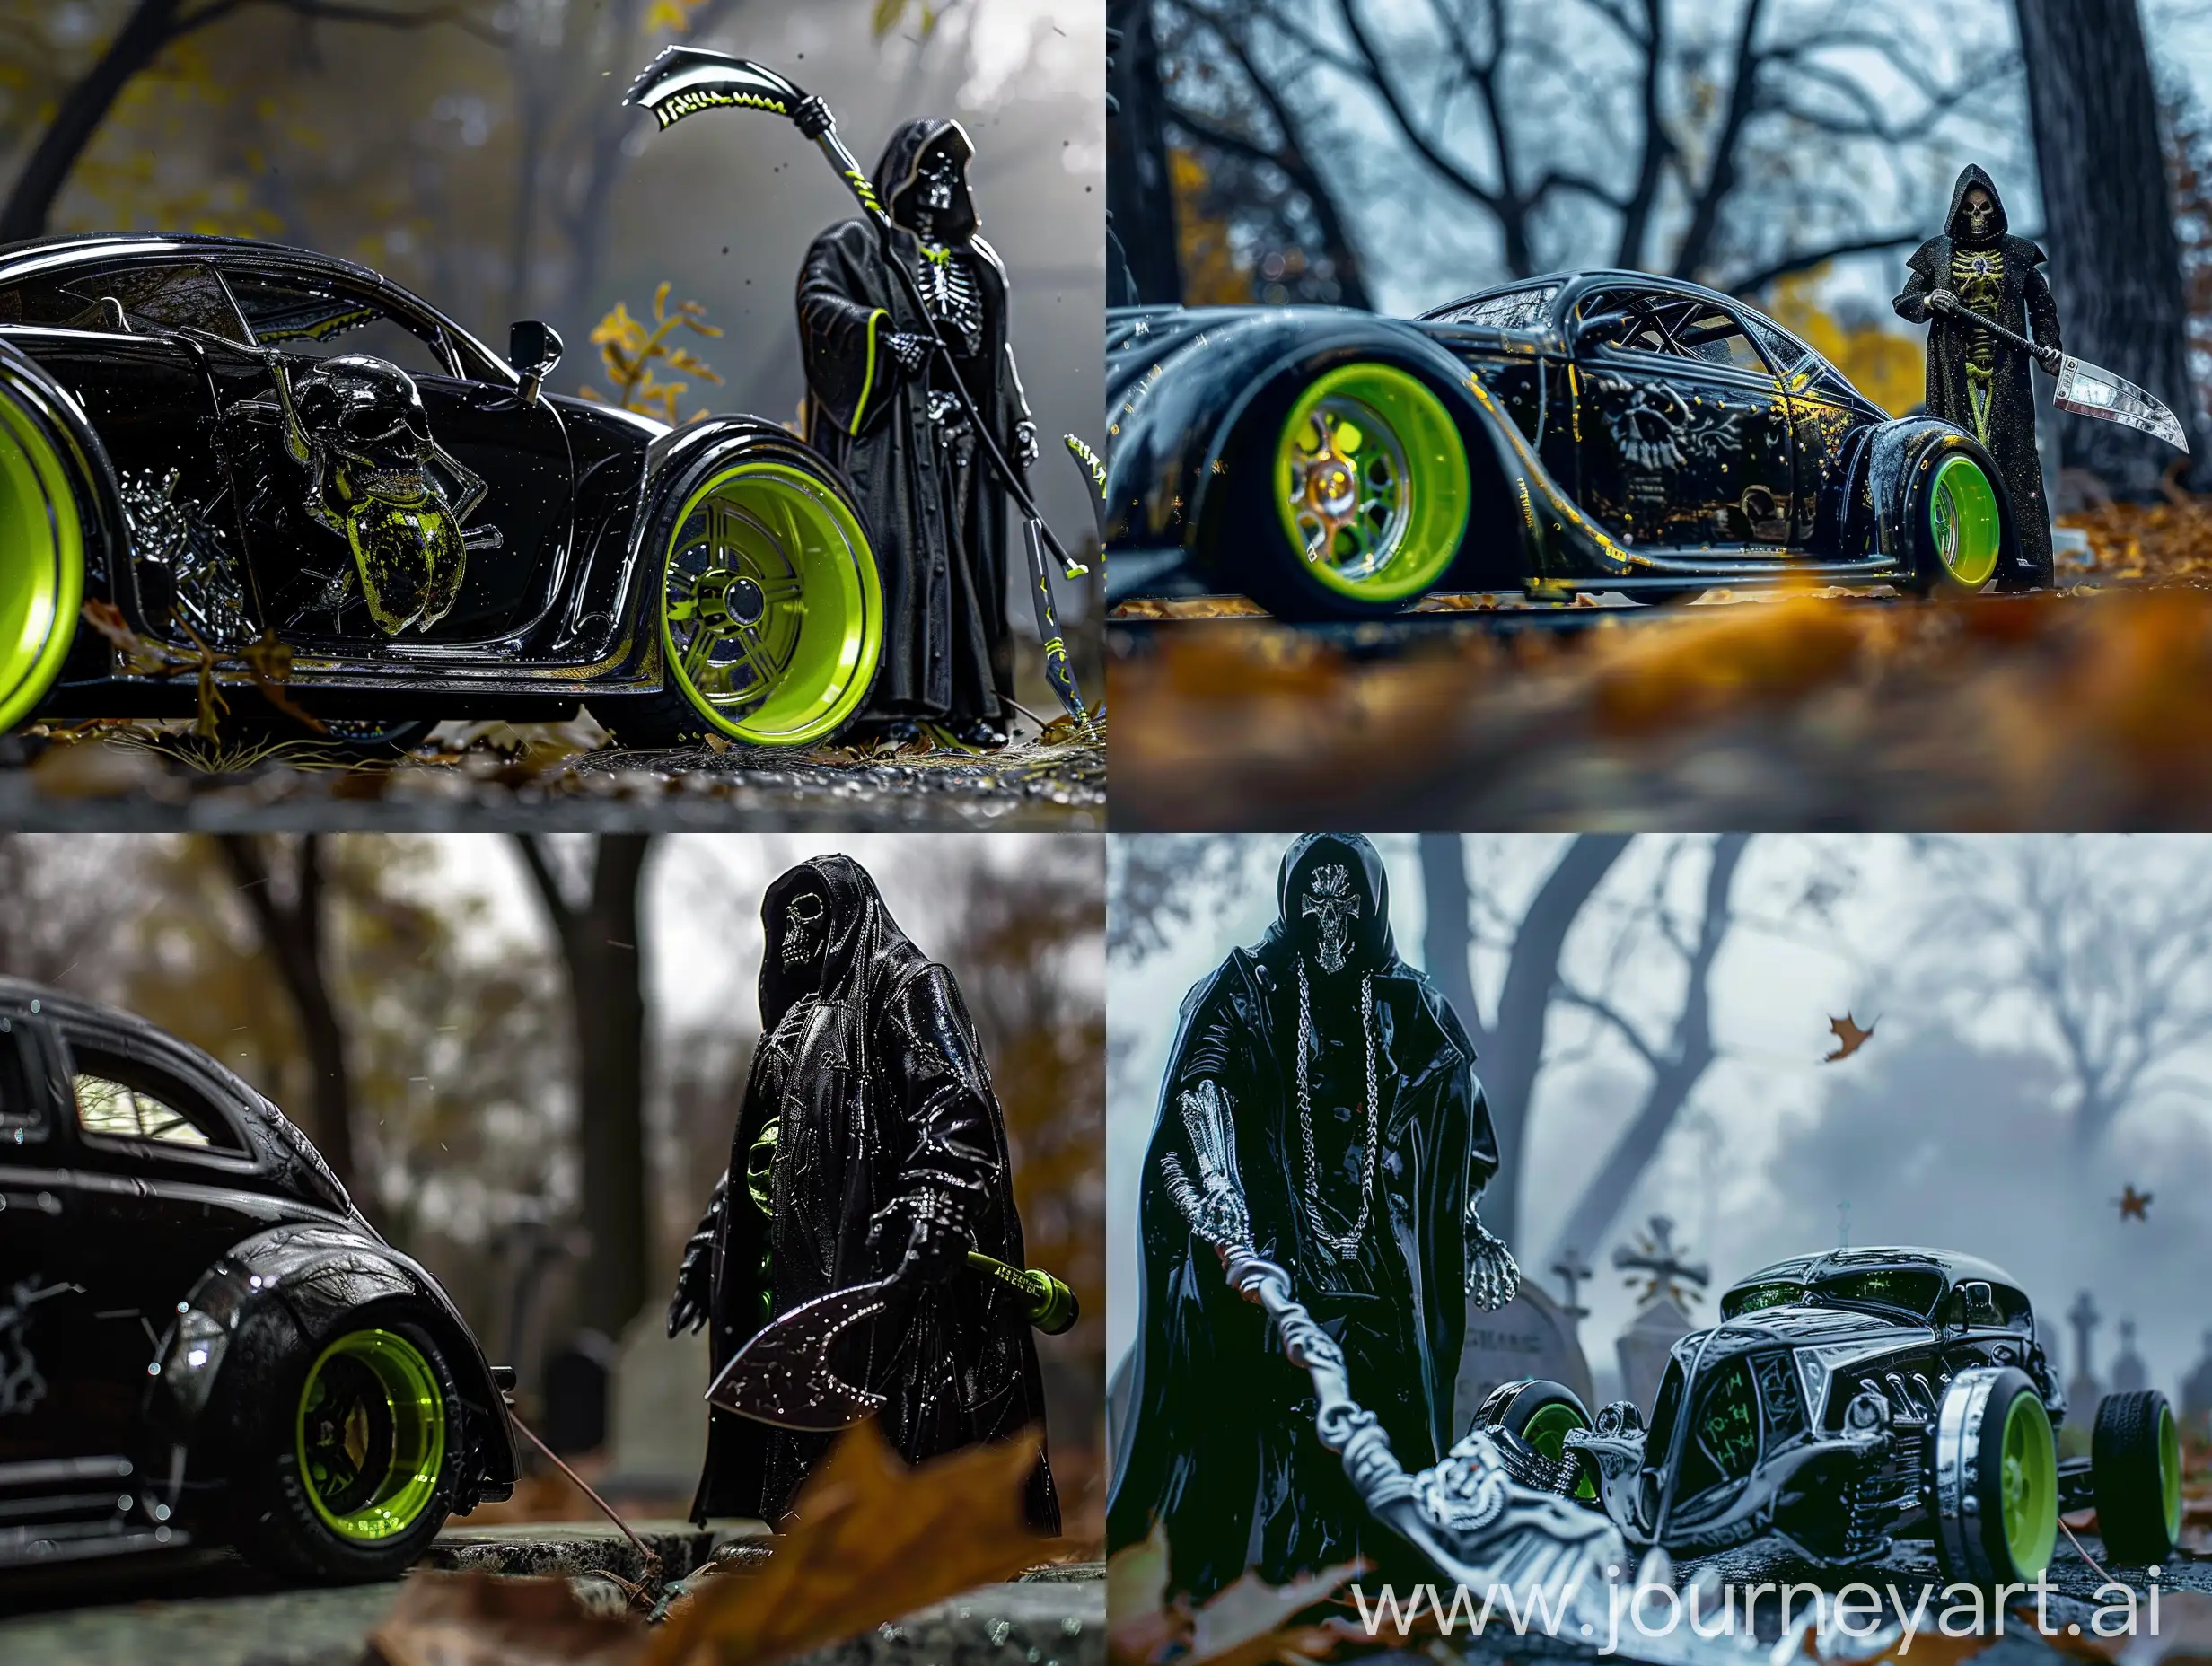 cinematic portrait magnificent art, close-up a black petroleum beetle chrome tuned paint chrome candy wide tires lime green chrome wheels mirrored glass graffiti skull necromancer in a hooded overcoat holding the sharp scythe of death, sharp focus, high contrast, dramatic luminosity, glith background gentle, haunted cemetery, serene, mist dry trees, wind blowing leaves, splendid magnificent night, high quality, best quality